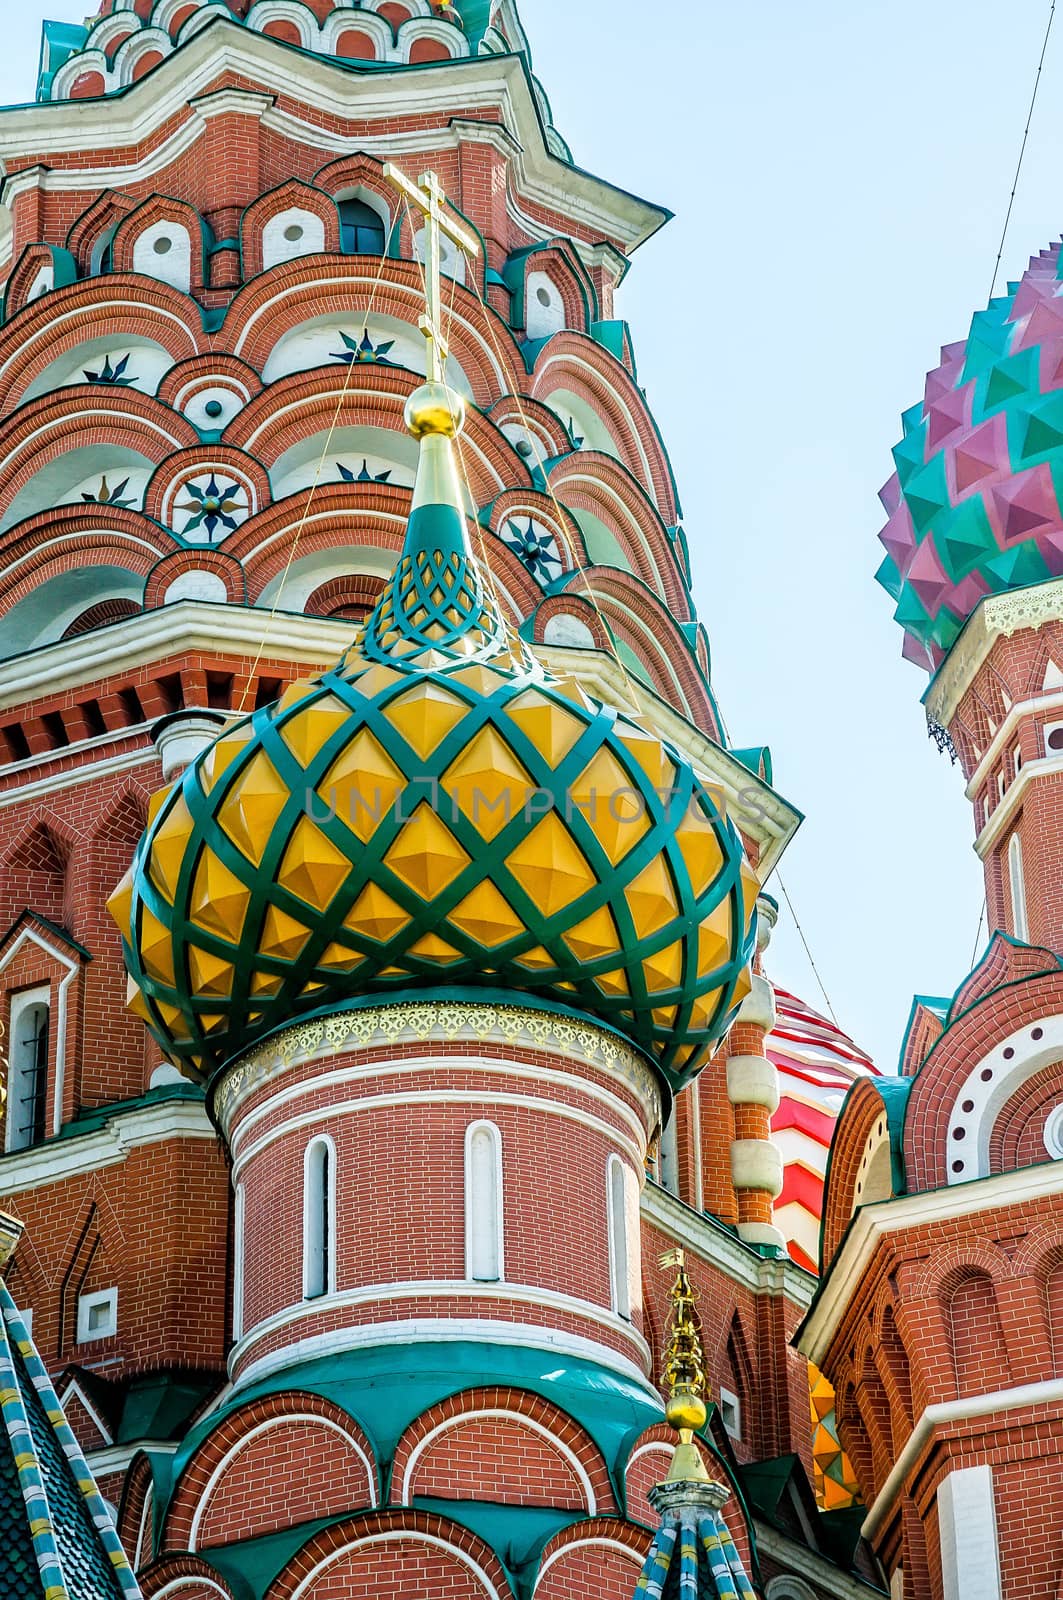 A detail of the colored steeples ot Saint Basil's Cathedral in Moscow